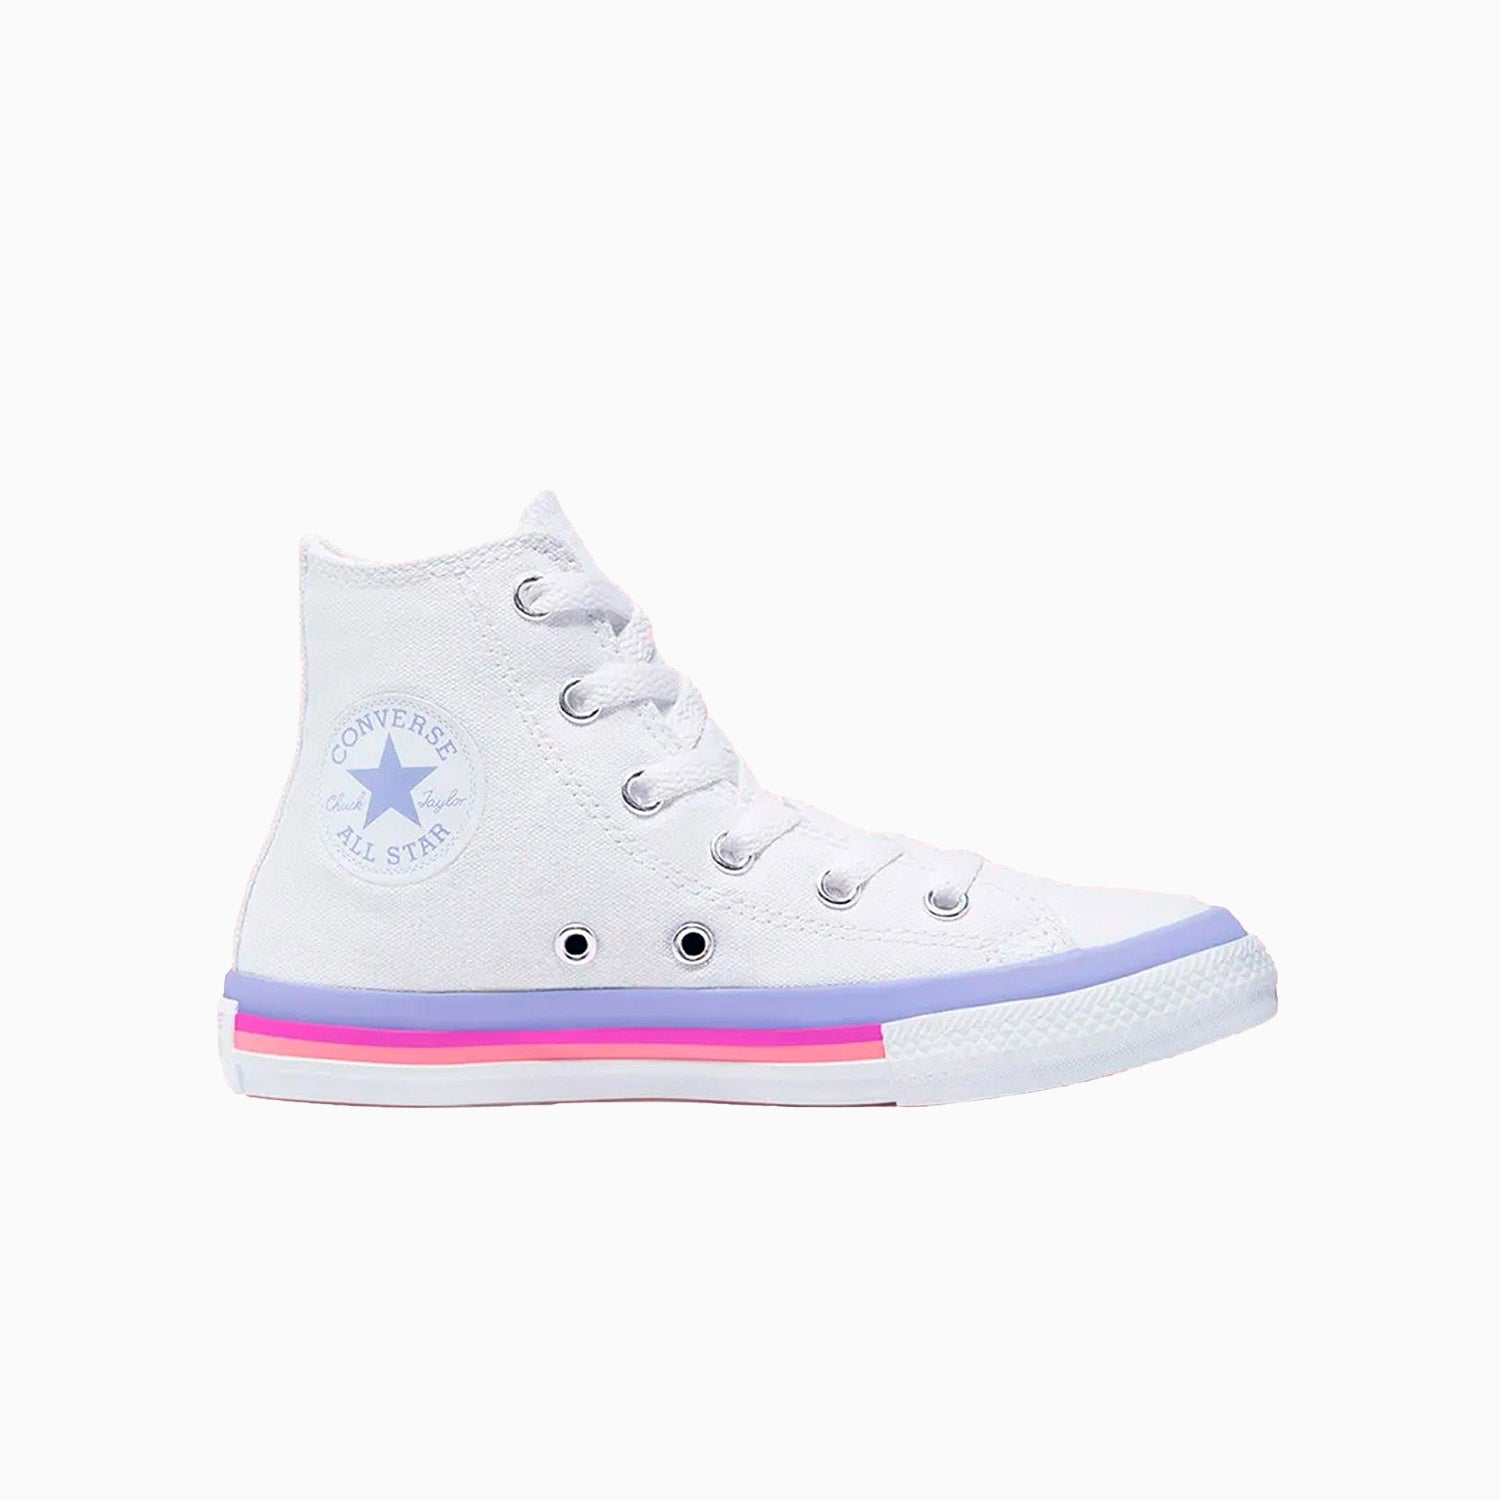 converse-kids-chuck-taylor-all-star-high-twilight-pulse-shoes-670976f